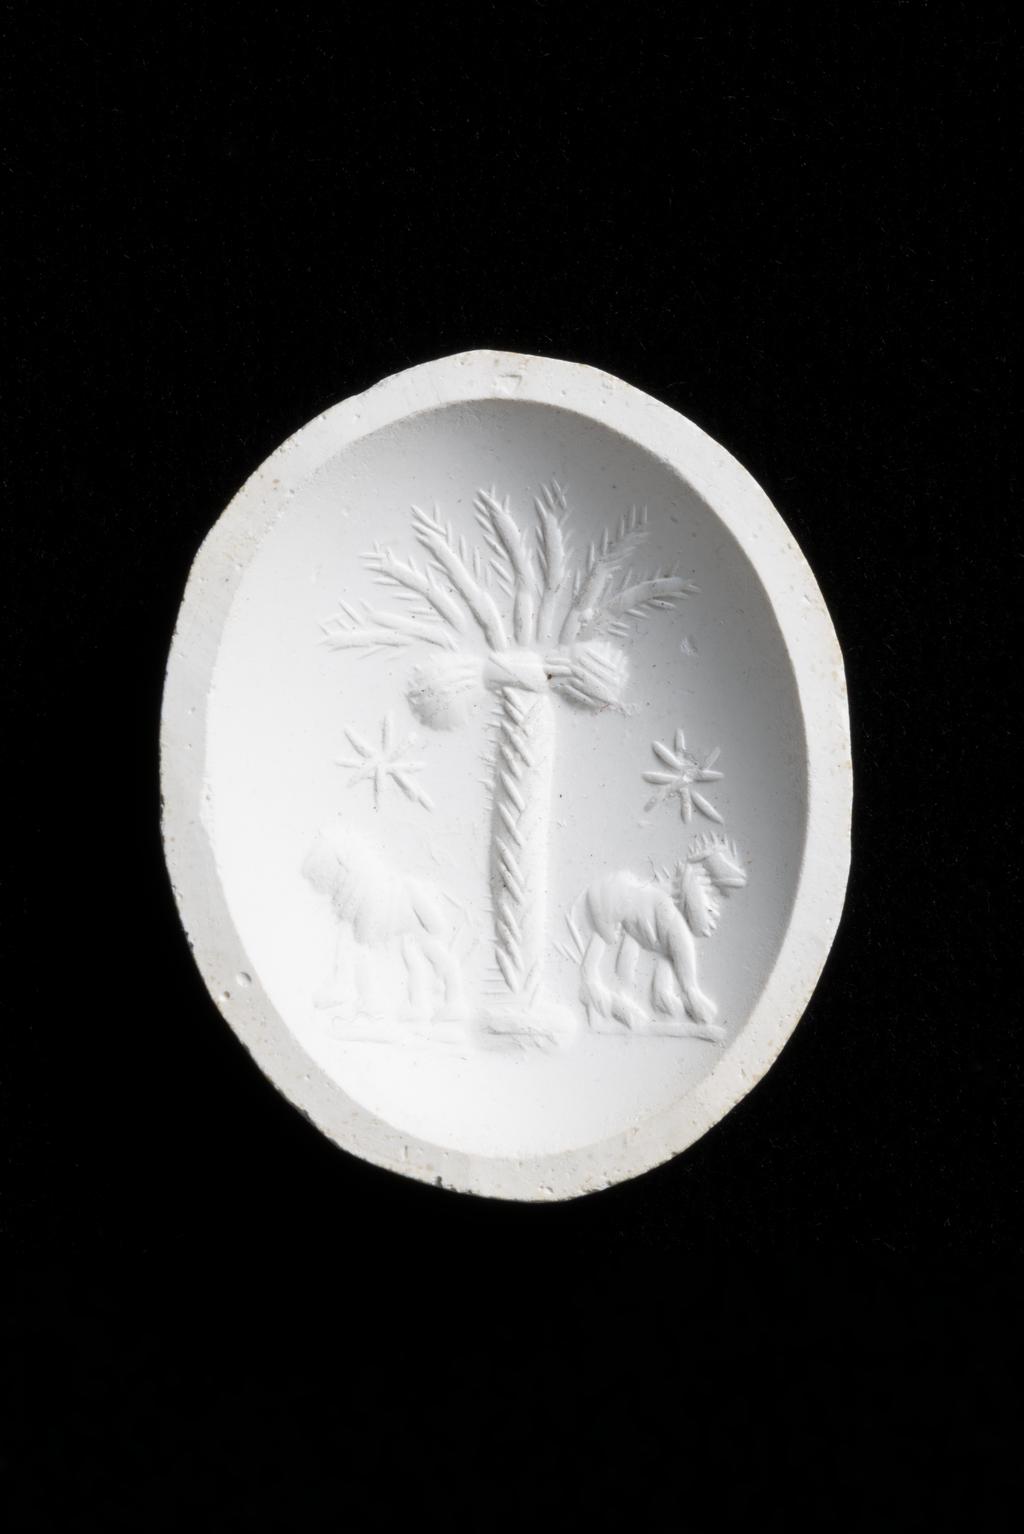 An image of Engraved gems. Magical amulet. Obverse: Helios, palm tree and lion. Intaglio cutting, chalcedony, 201-300 AD. Roman.